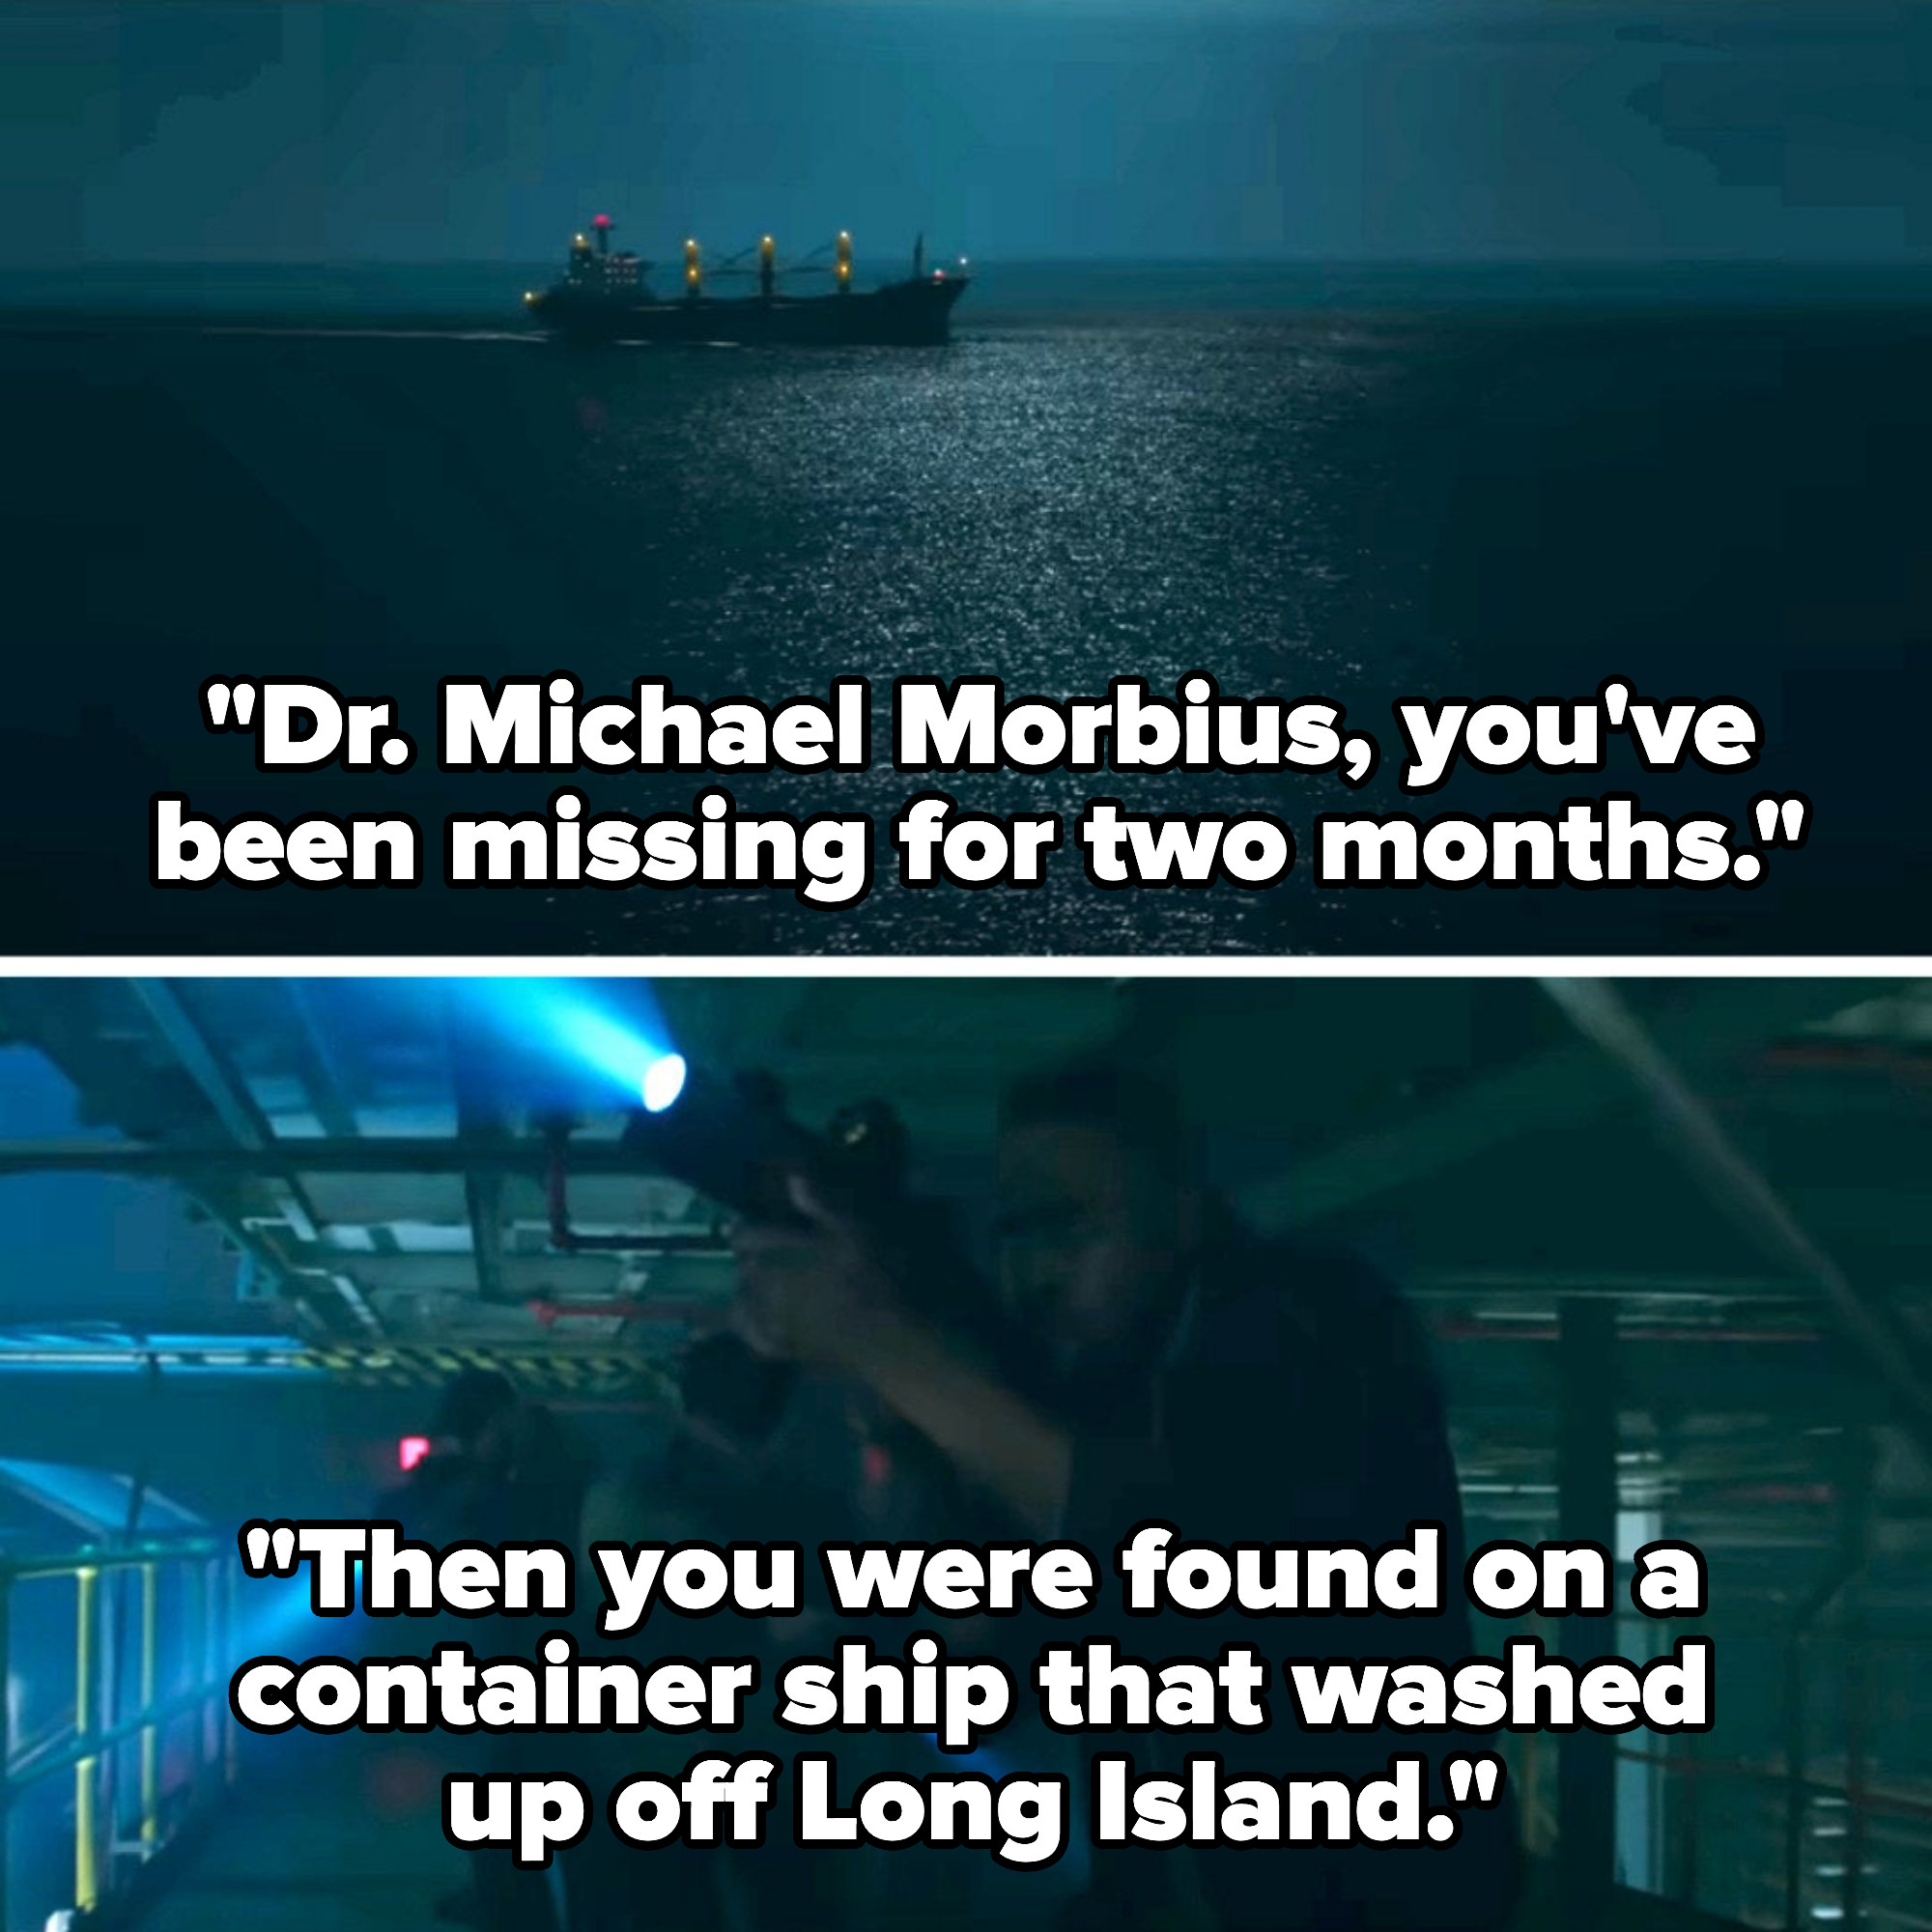 &quot;Then you were found on a container ship that washed up off Long Island.&quot;